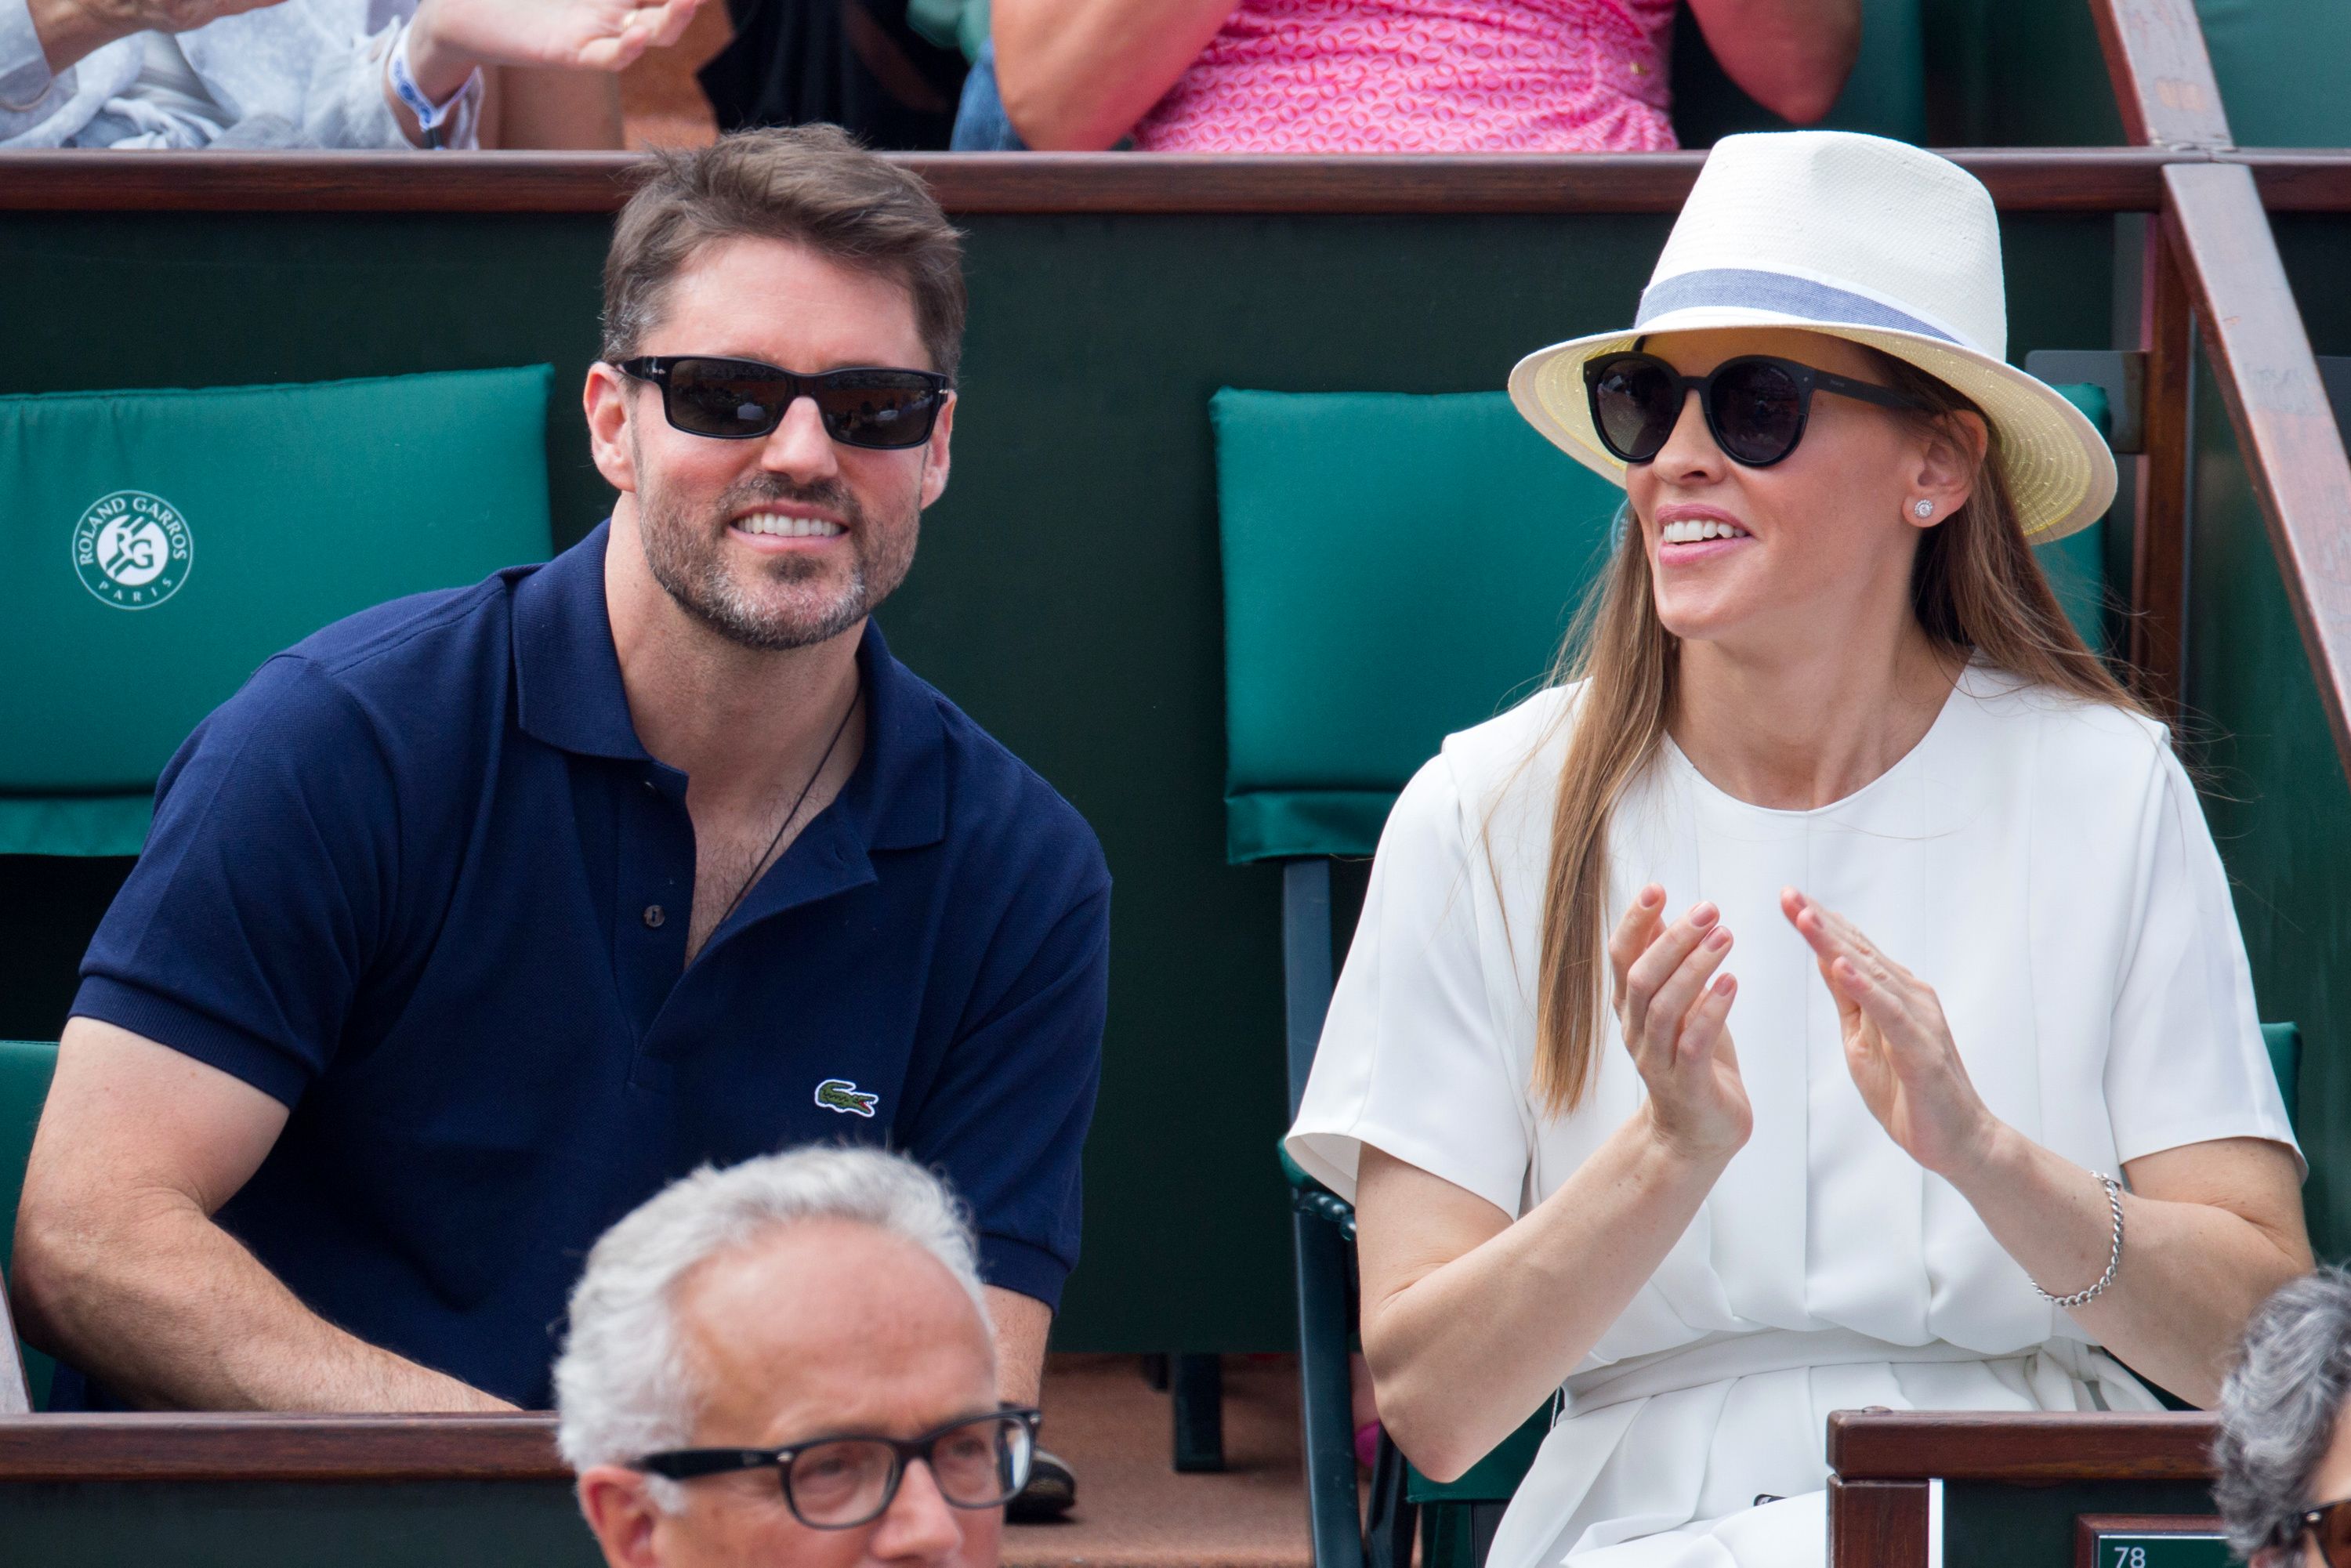 Philip Schneider and Hilary Swank at the French Tennis Open Day 14